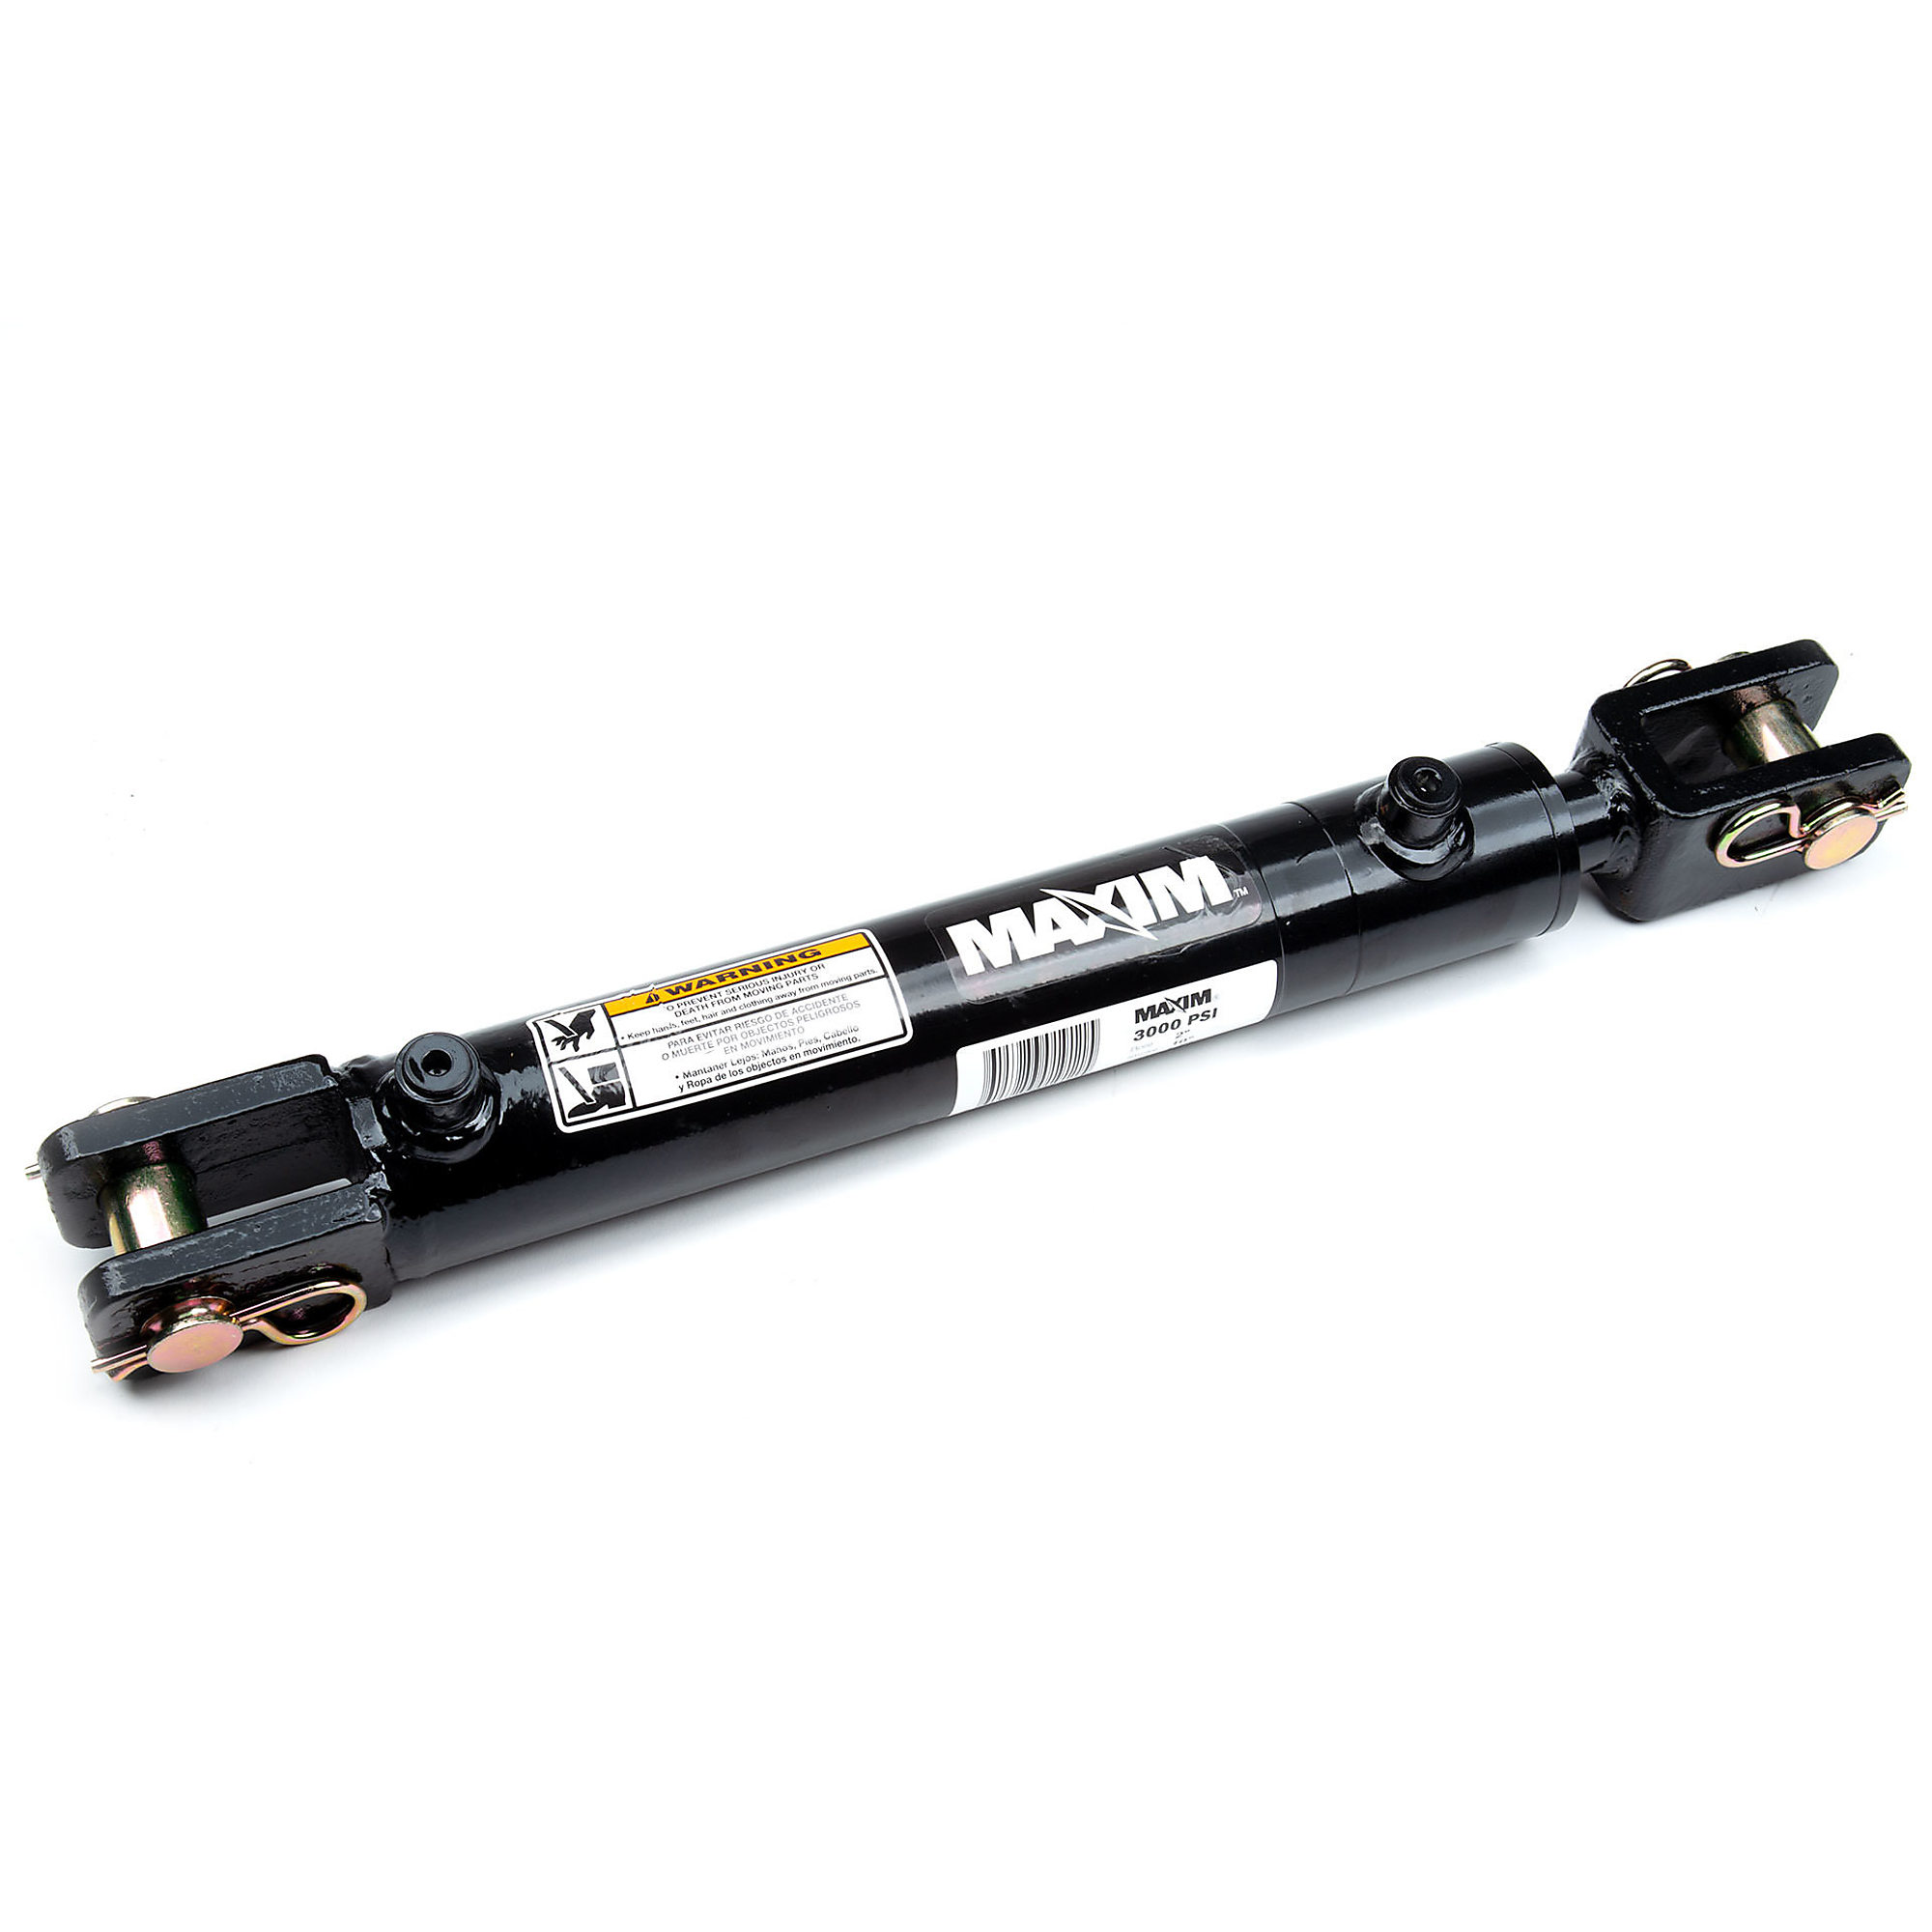 Maxim, WC Welded Cylinder, Max. PSI 3000, Bore Diameter 2.5 in, Stroke Length 8 in, Model 288416